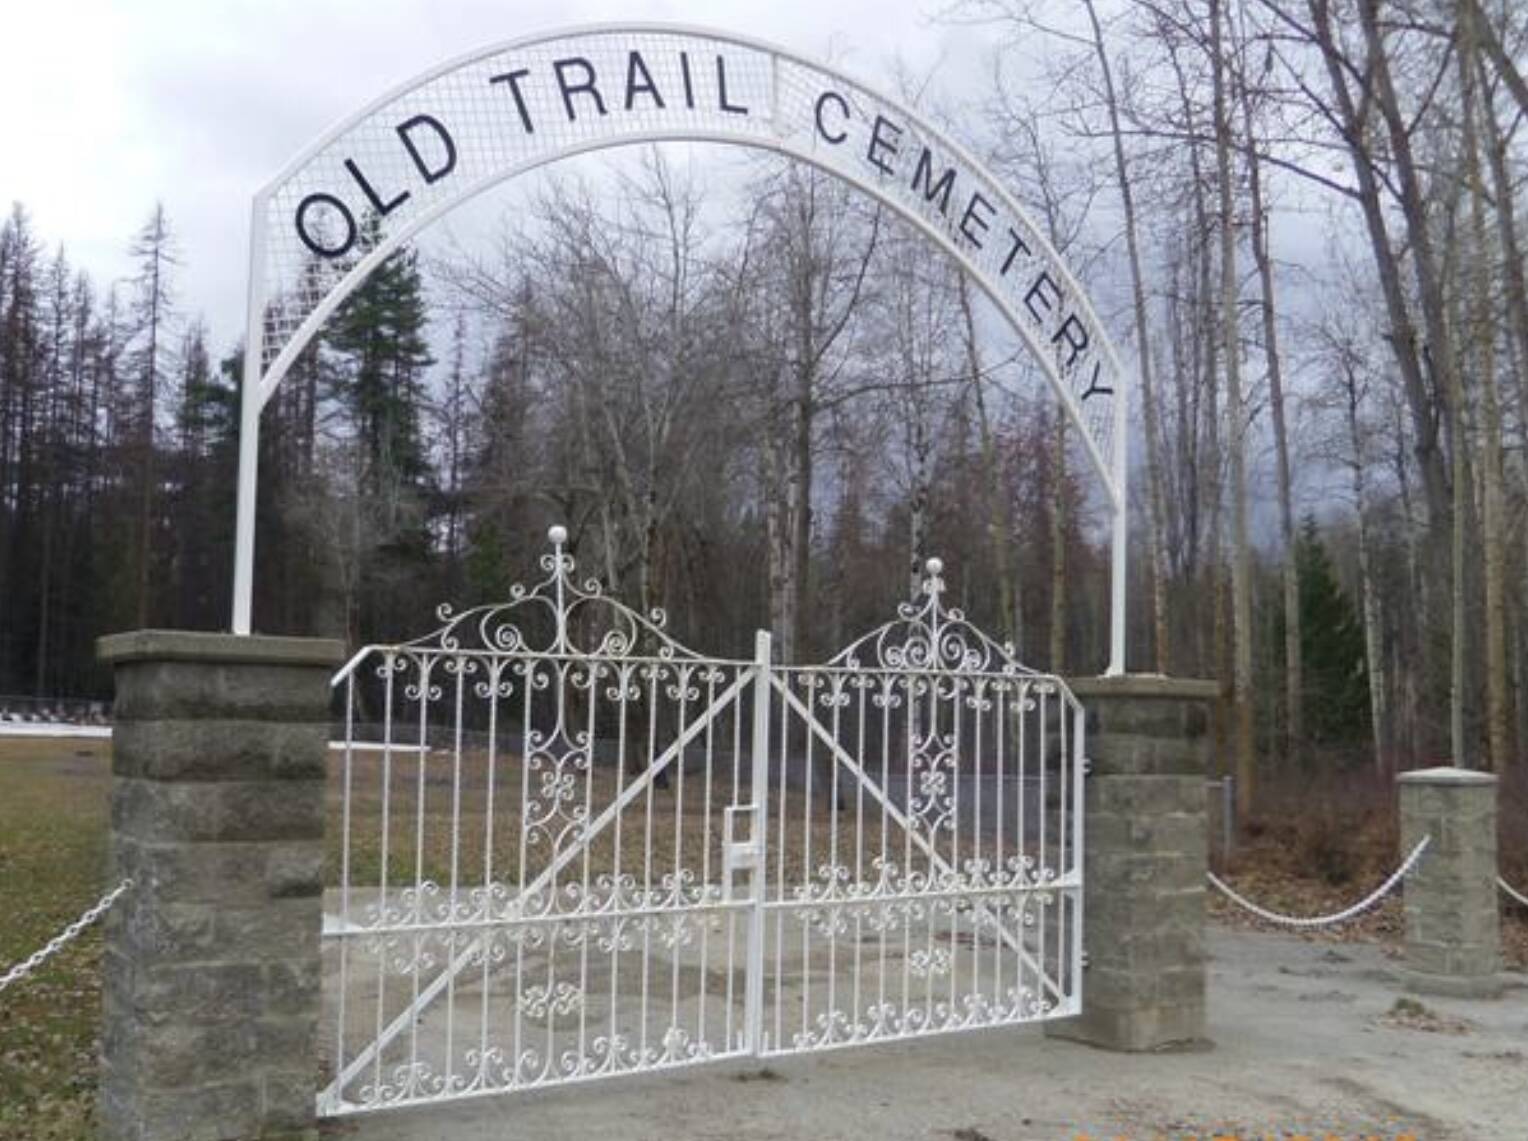 (Right) The Old Trail Cemetery contains 1,134 remains along with a memorial to the soldiers killed in the First World War. Images: FindAGrave.com